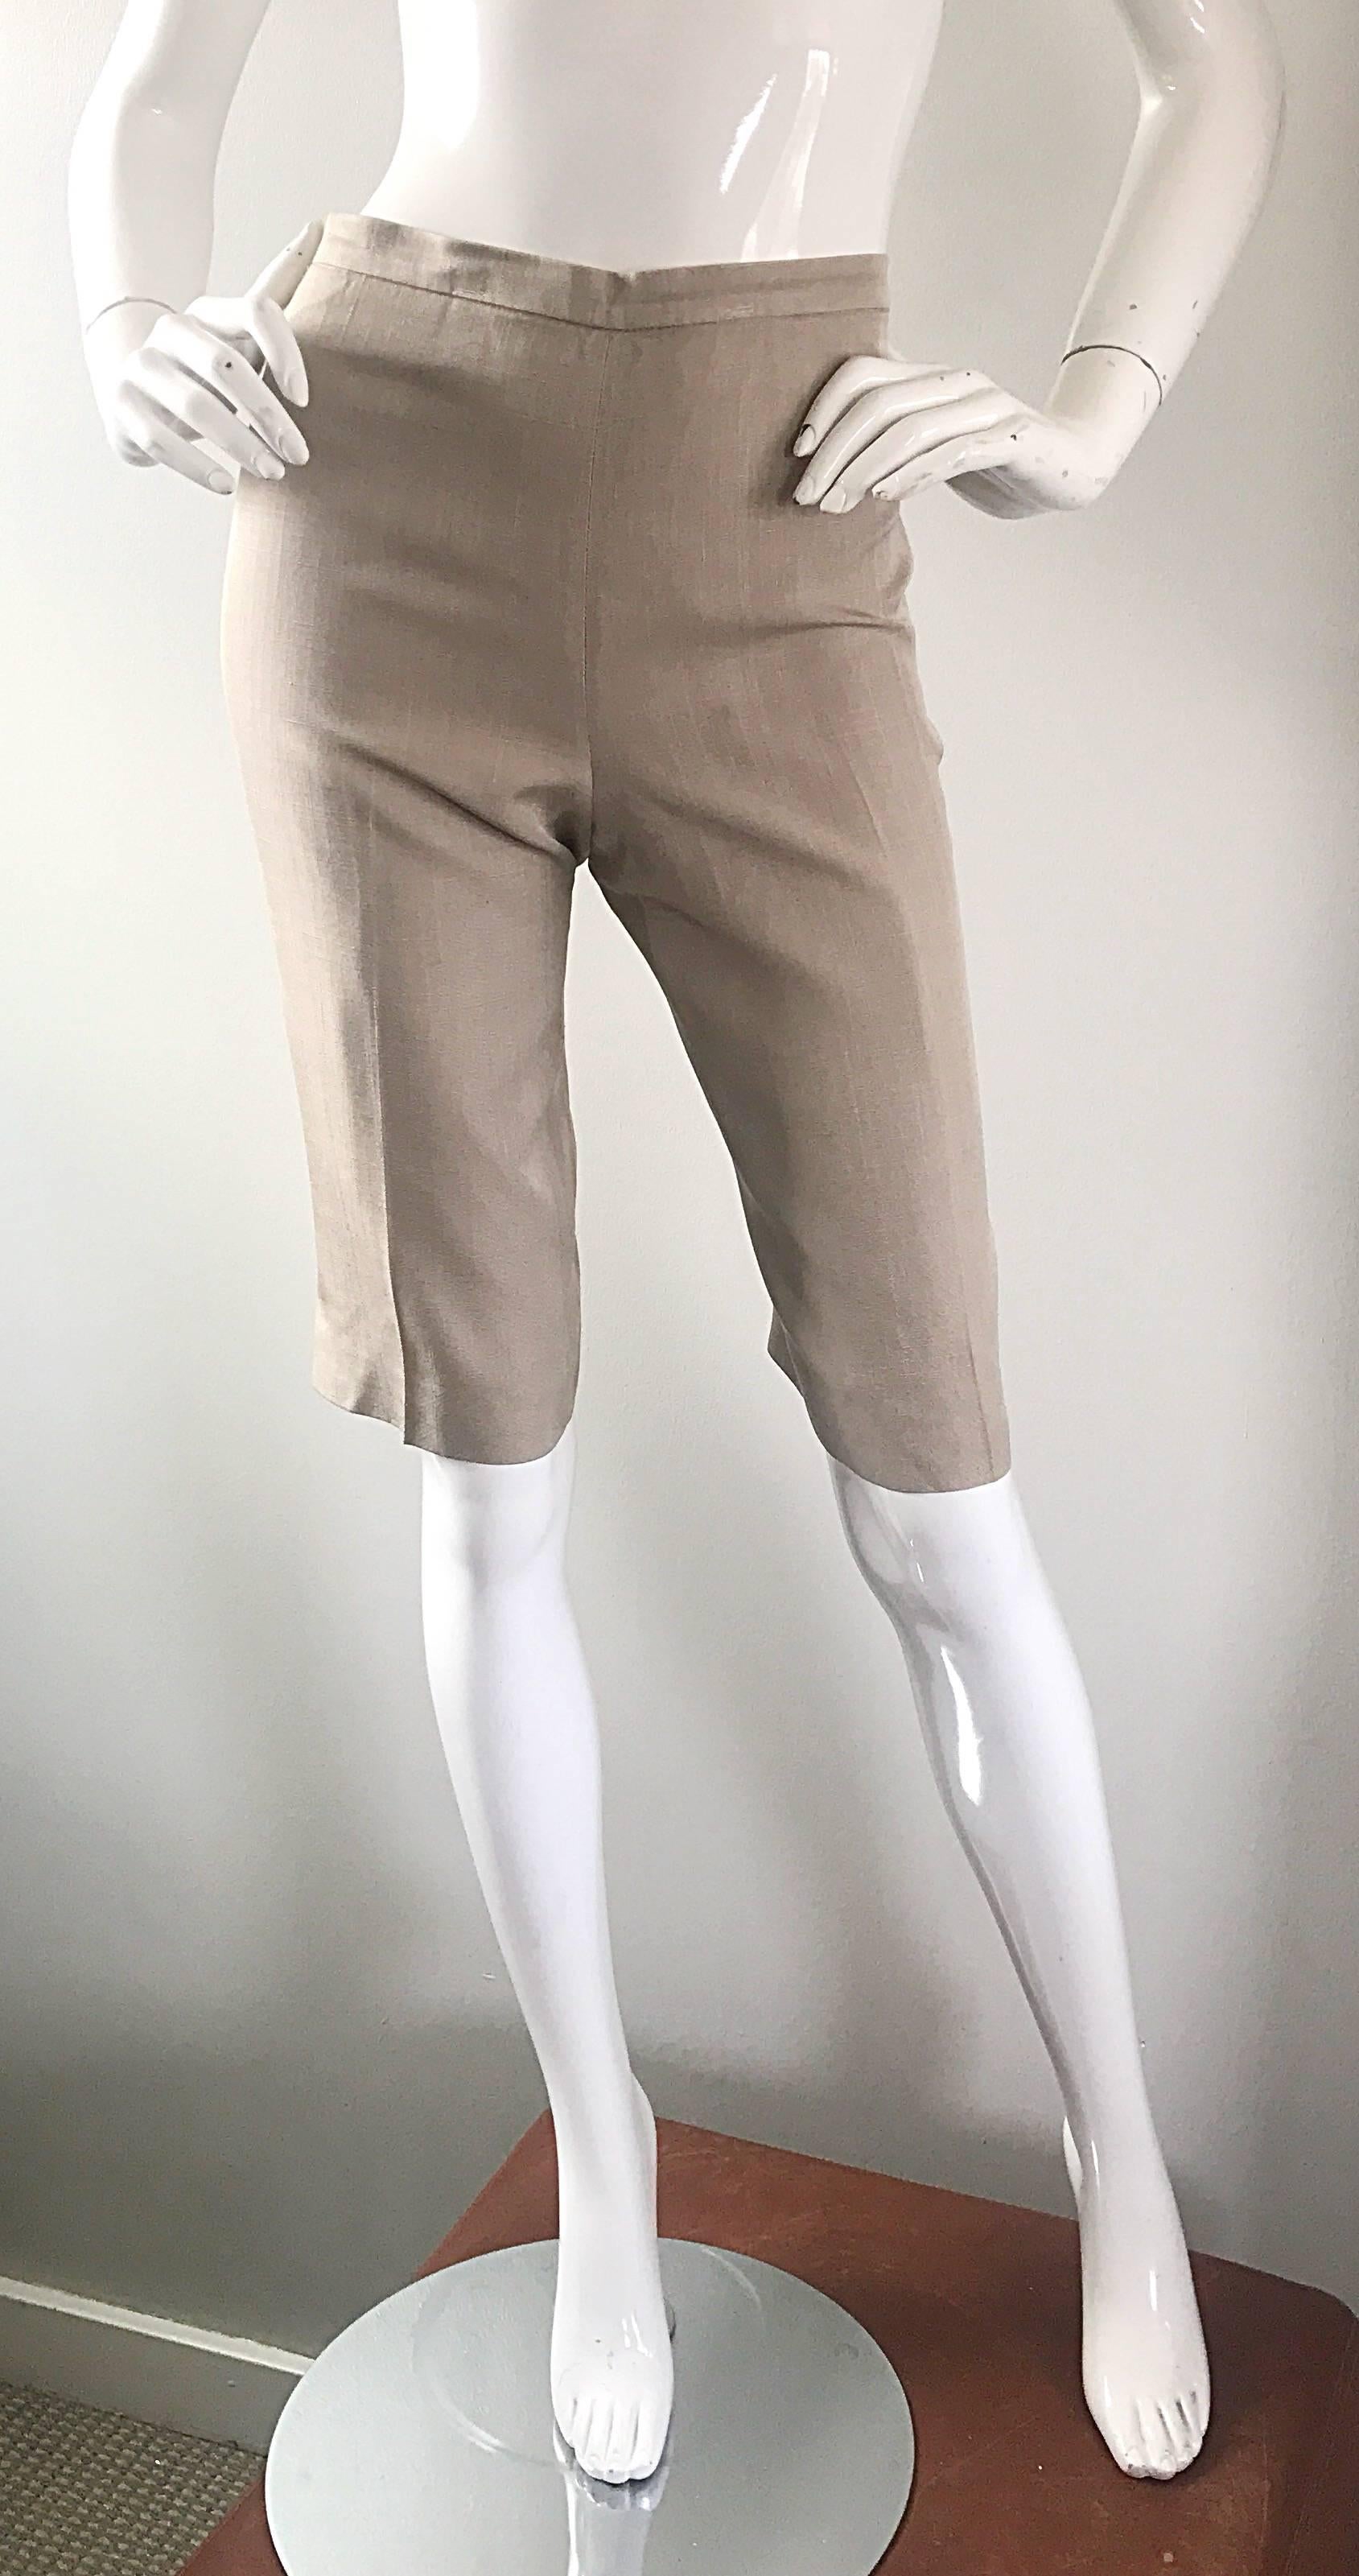 Rare early 90s MICHAEL KORS Collection khaki / beige cropped silk 
pedal pushers / shorts! High waisted fit with sleek tailored legs. Hidden zipper up th eback with button closure. Fully lined. Can easily be dressed up or down. In great condition.